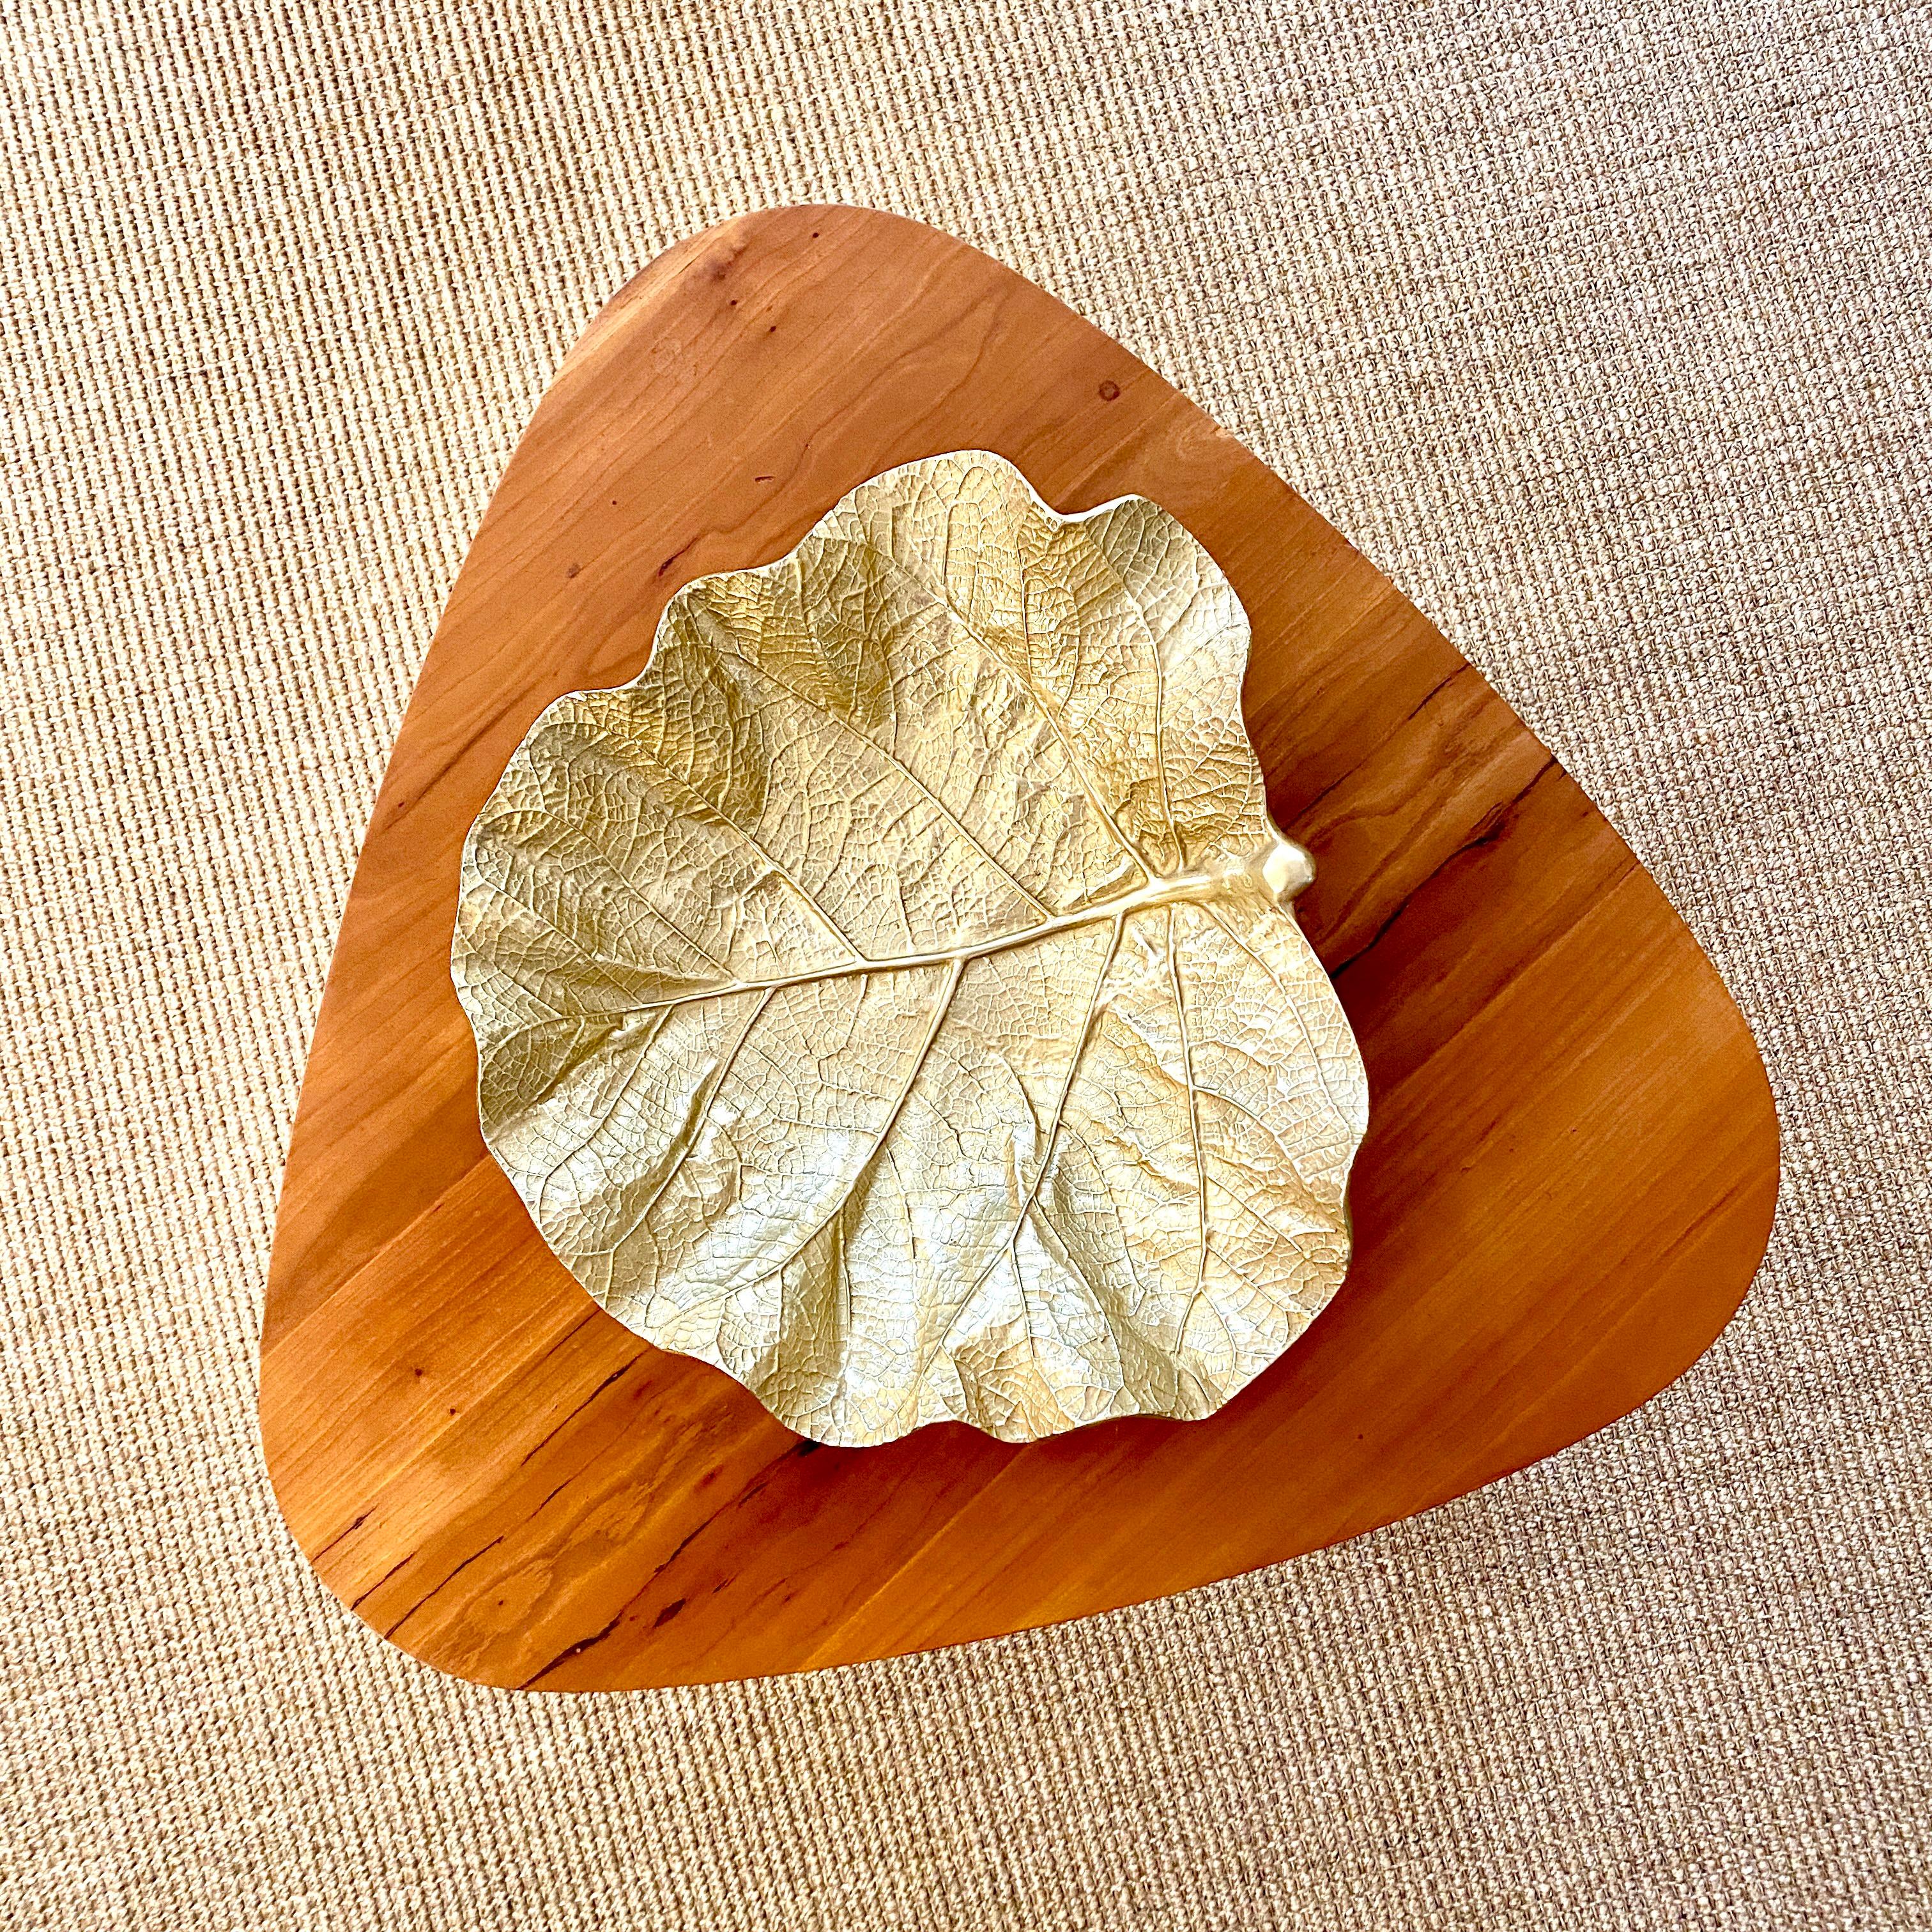 Vintage gold anodized aluminum alloy bowl in the shape of a Sea Grape leaf. The leaf designs were designed by well known sculptor Oskar Hansen for Virginia MetalCrafters in Waynesboro, Virginia. The leaf is hand made, hand finished and of the